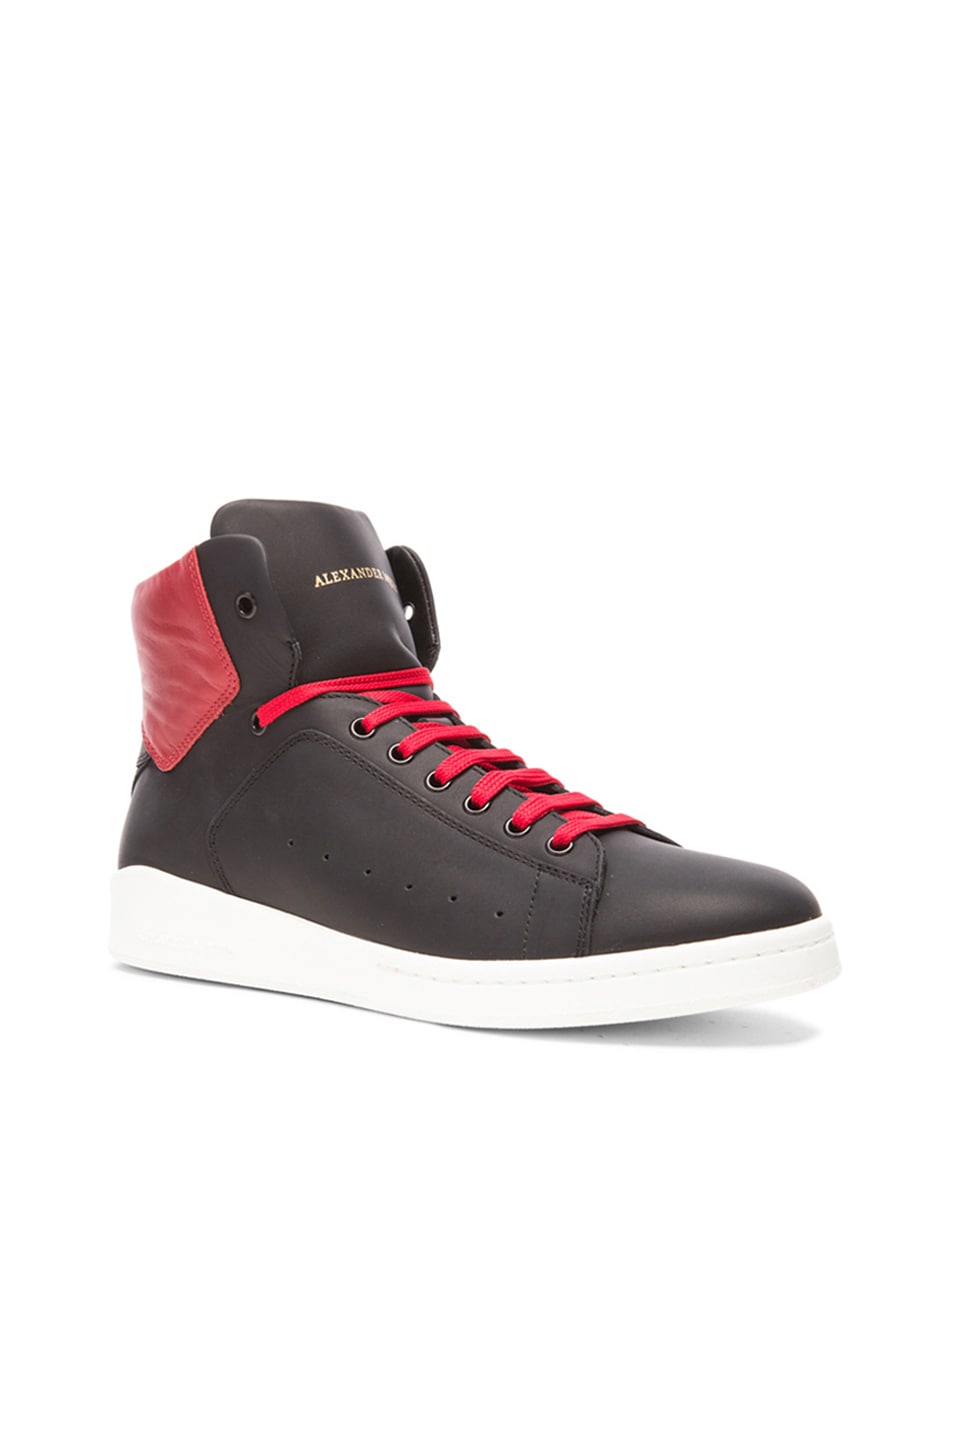 Image 1 of Alexander McQueen High Top Leather Sneakers in Black & Red